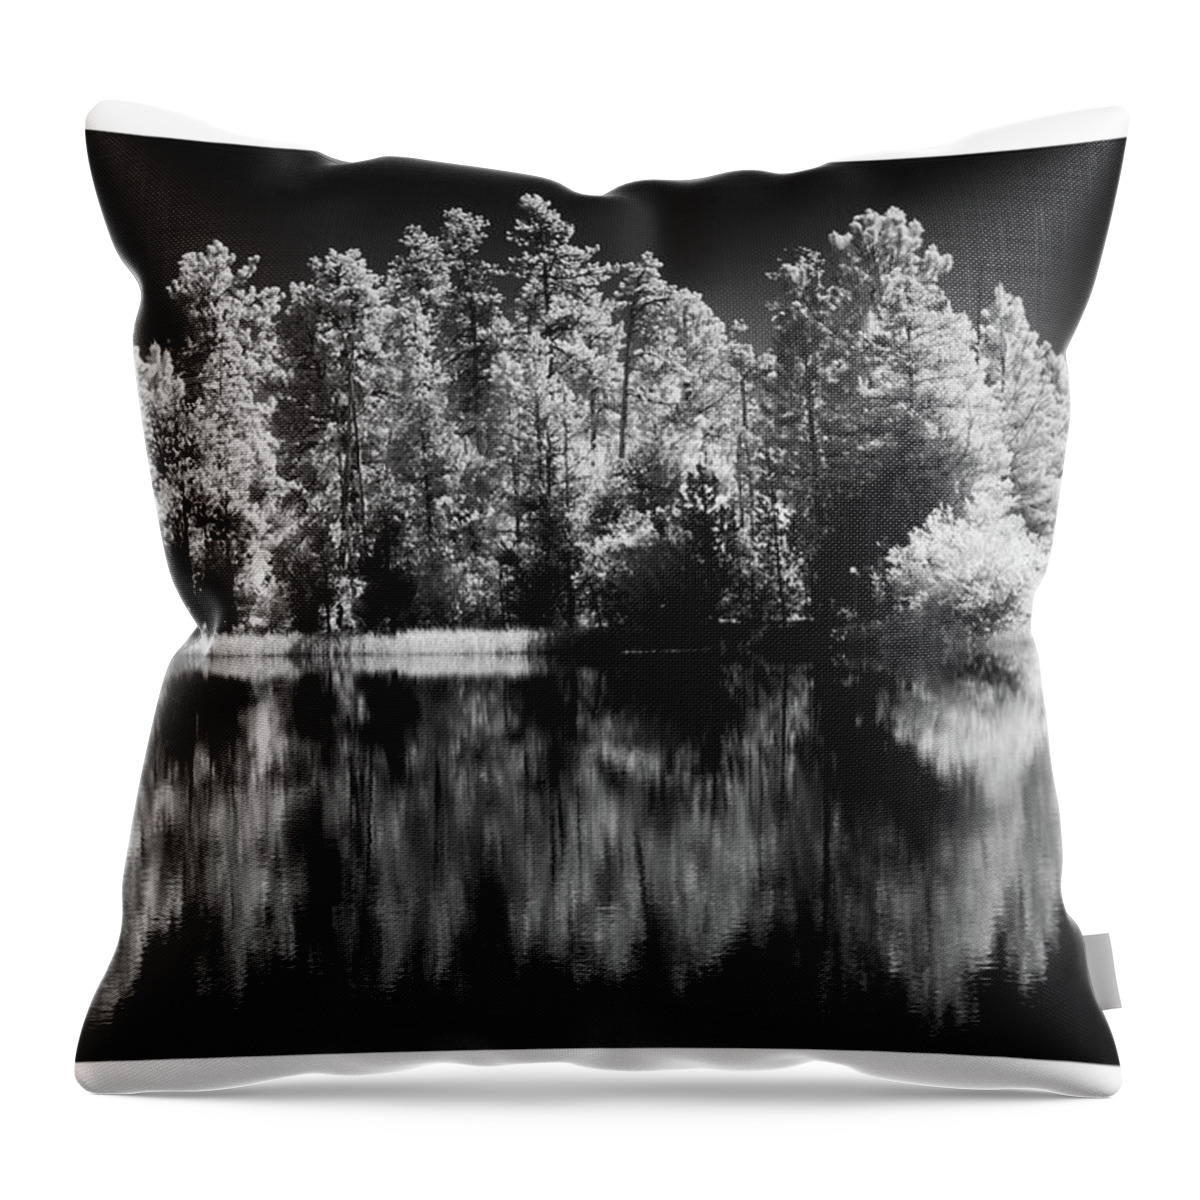  Flaming Gorge Throw Pillow featuring the photograph Invisible Reflection by Brian Duram